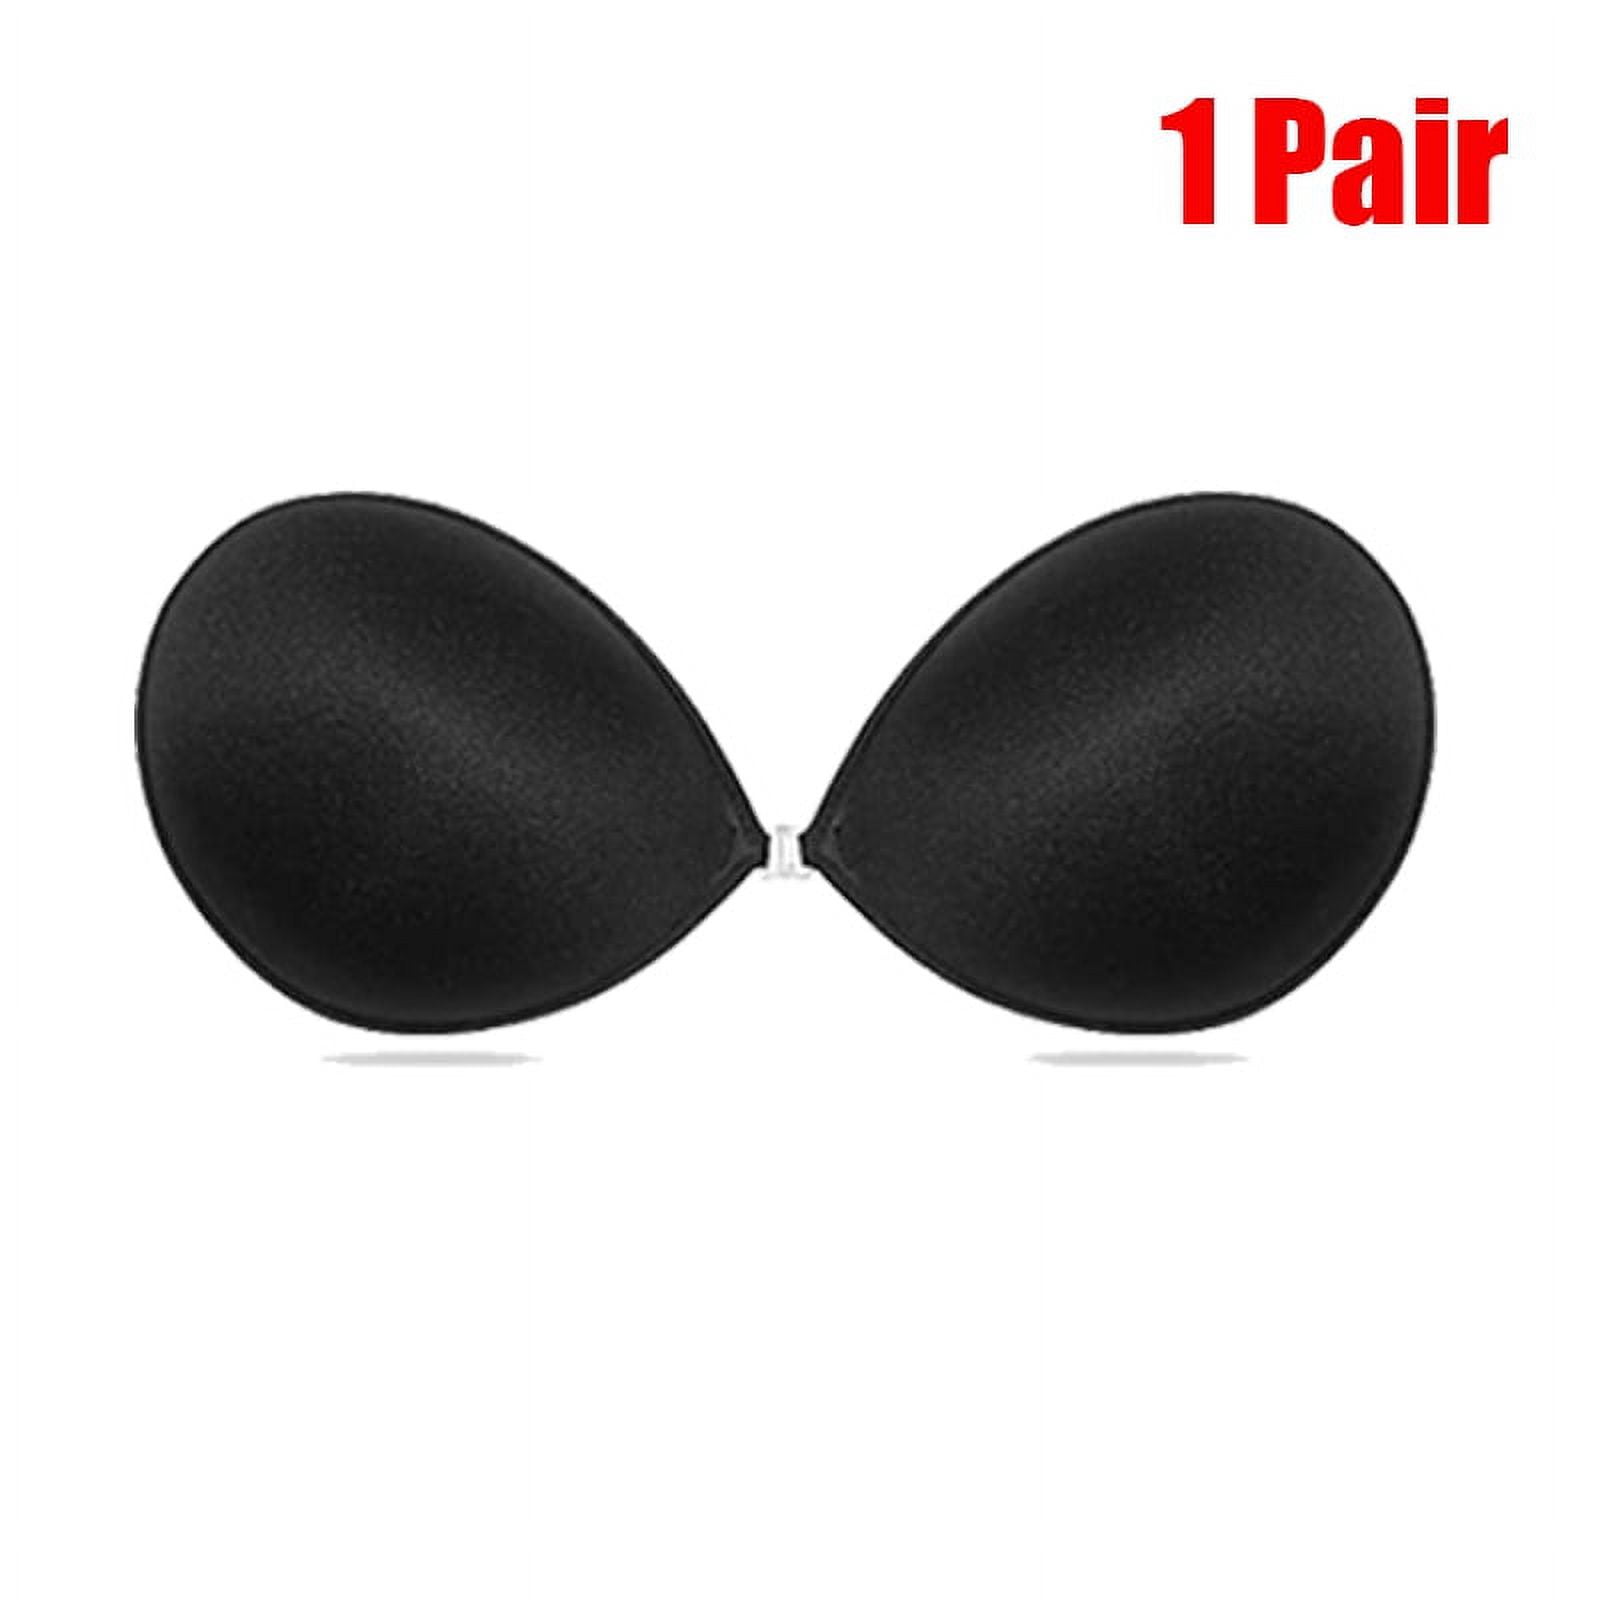 Buy Clefairy Invisible Adhesive Strapless Bra Sticky Push Up